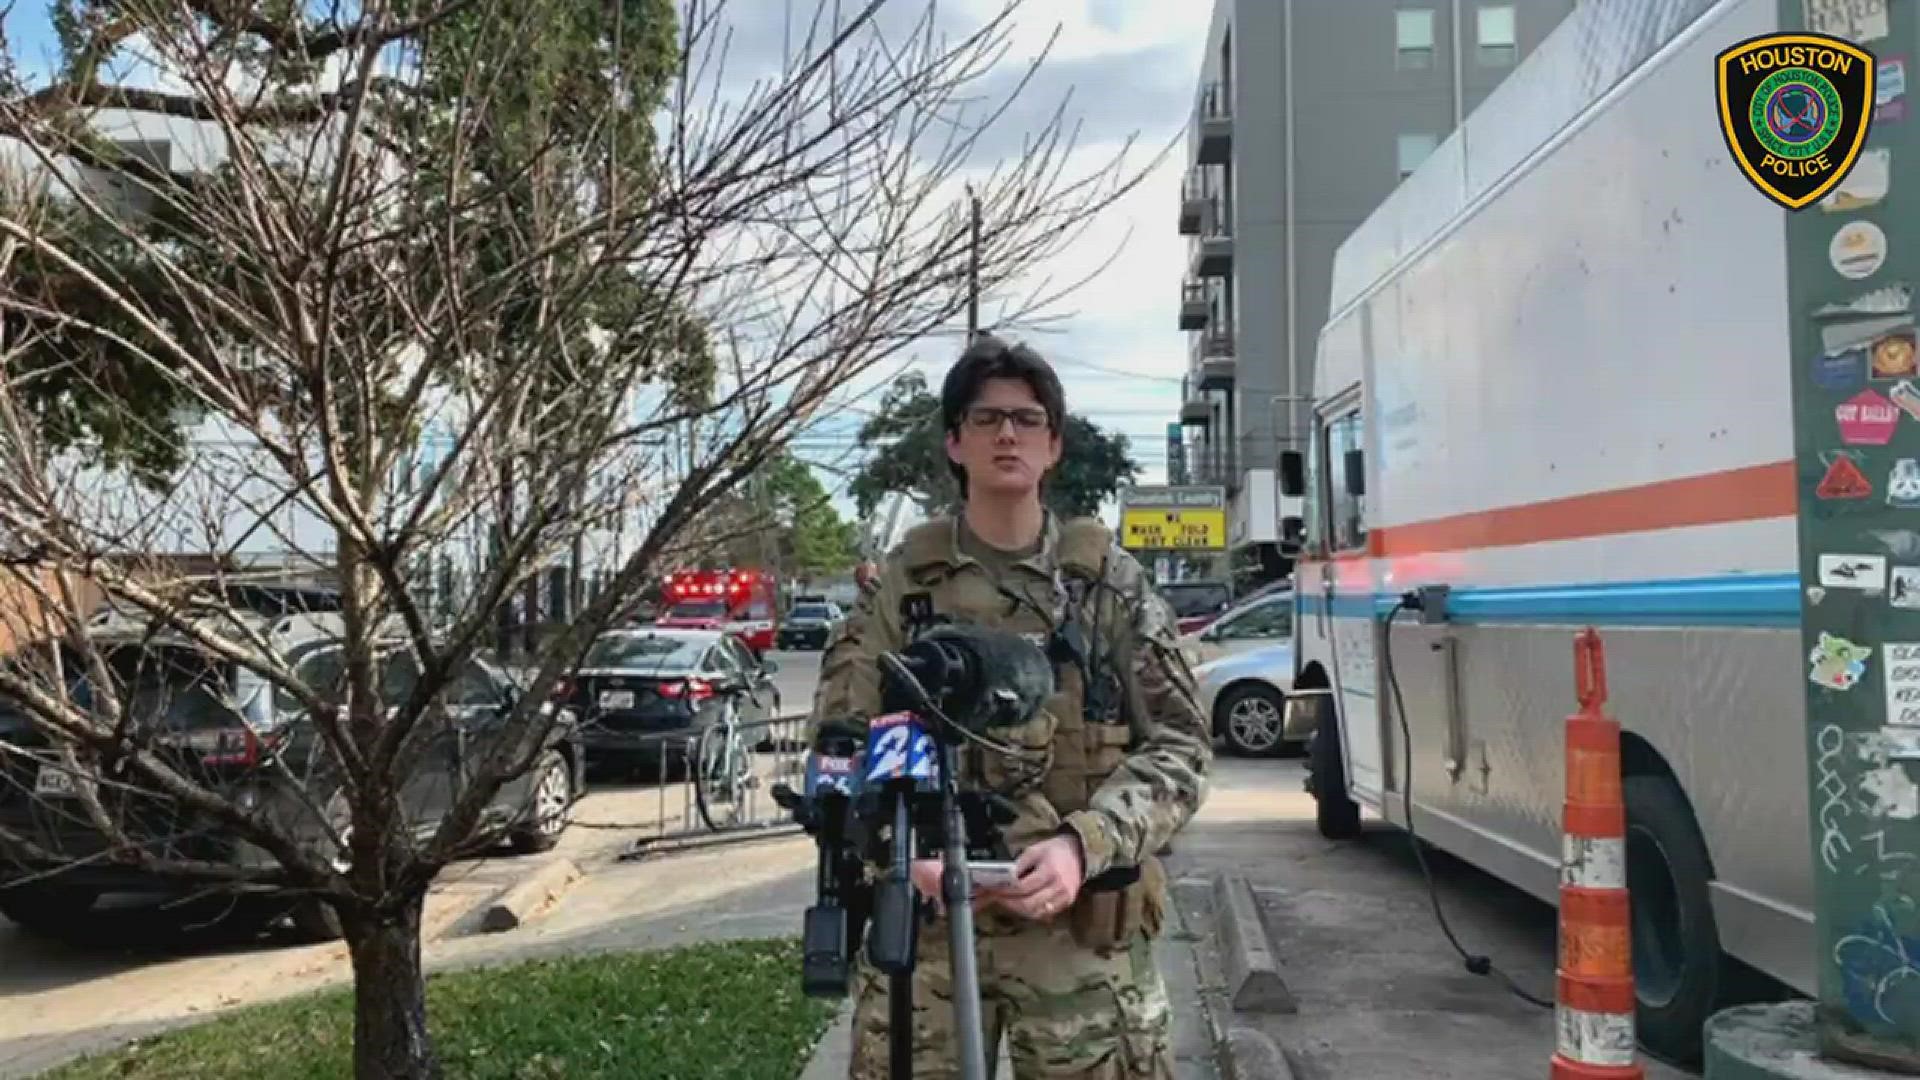 Commander Megan Howard explains what lead to HPD SWAT to respond to a Montrose-area residence Thursday morning where a man was taken into custody after several hours